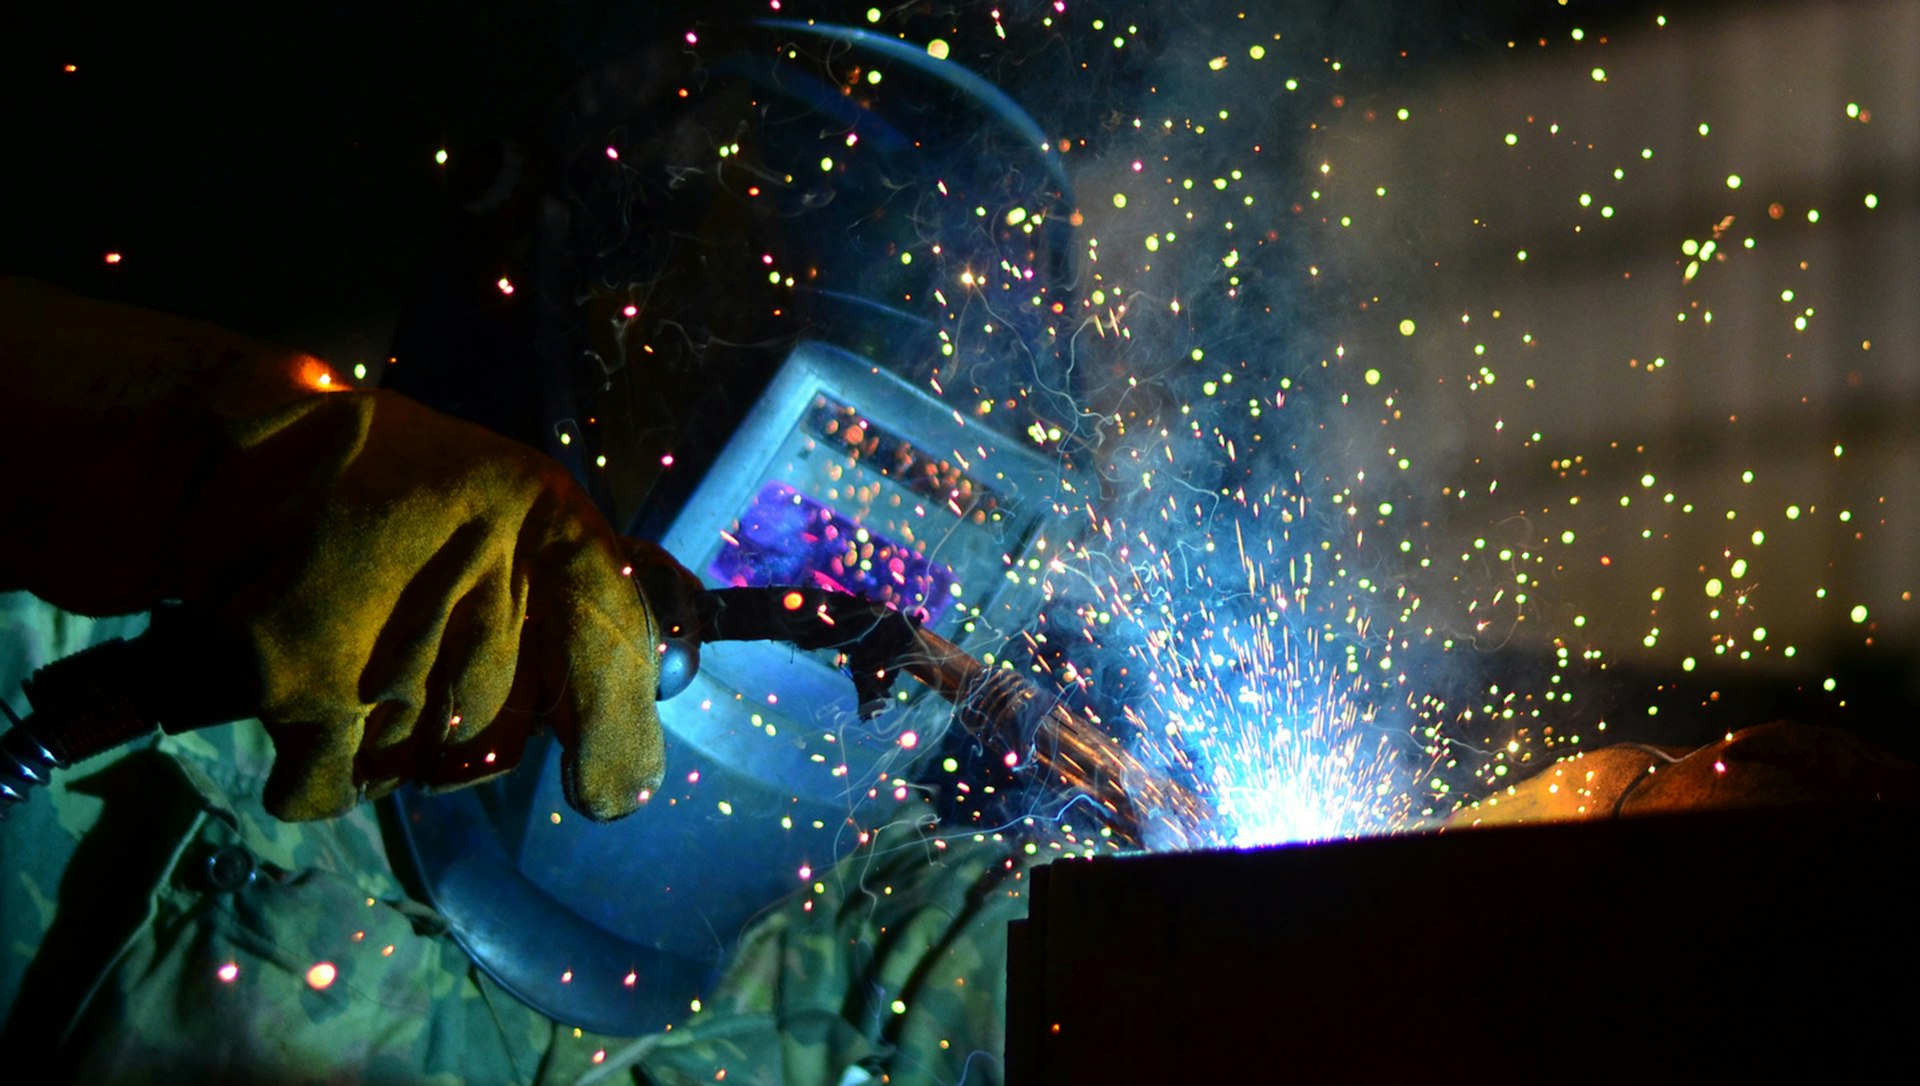 Person with helmet is welding, sparks and fume occur